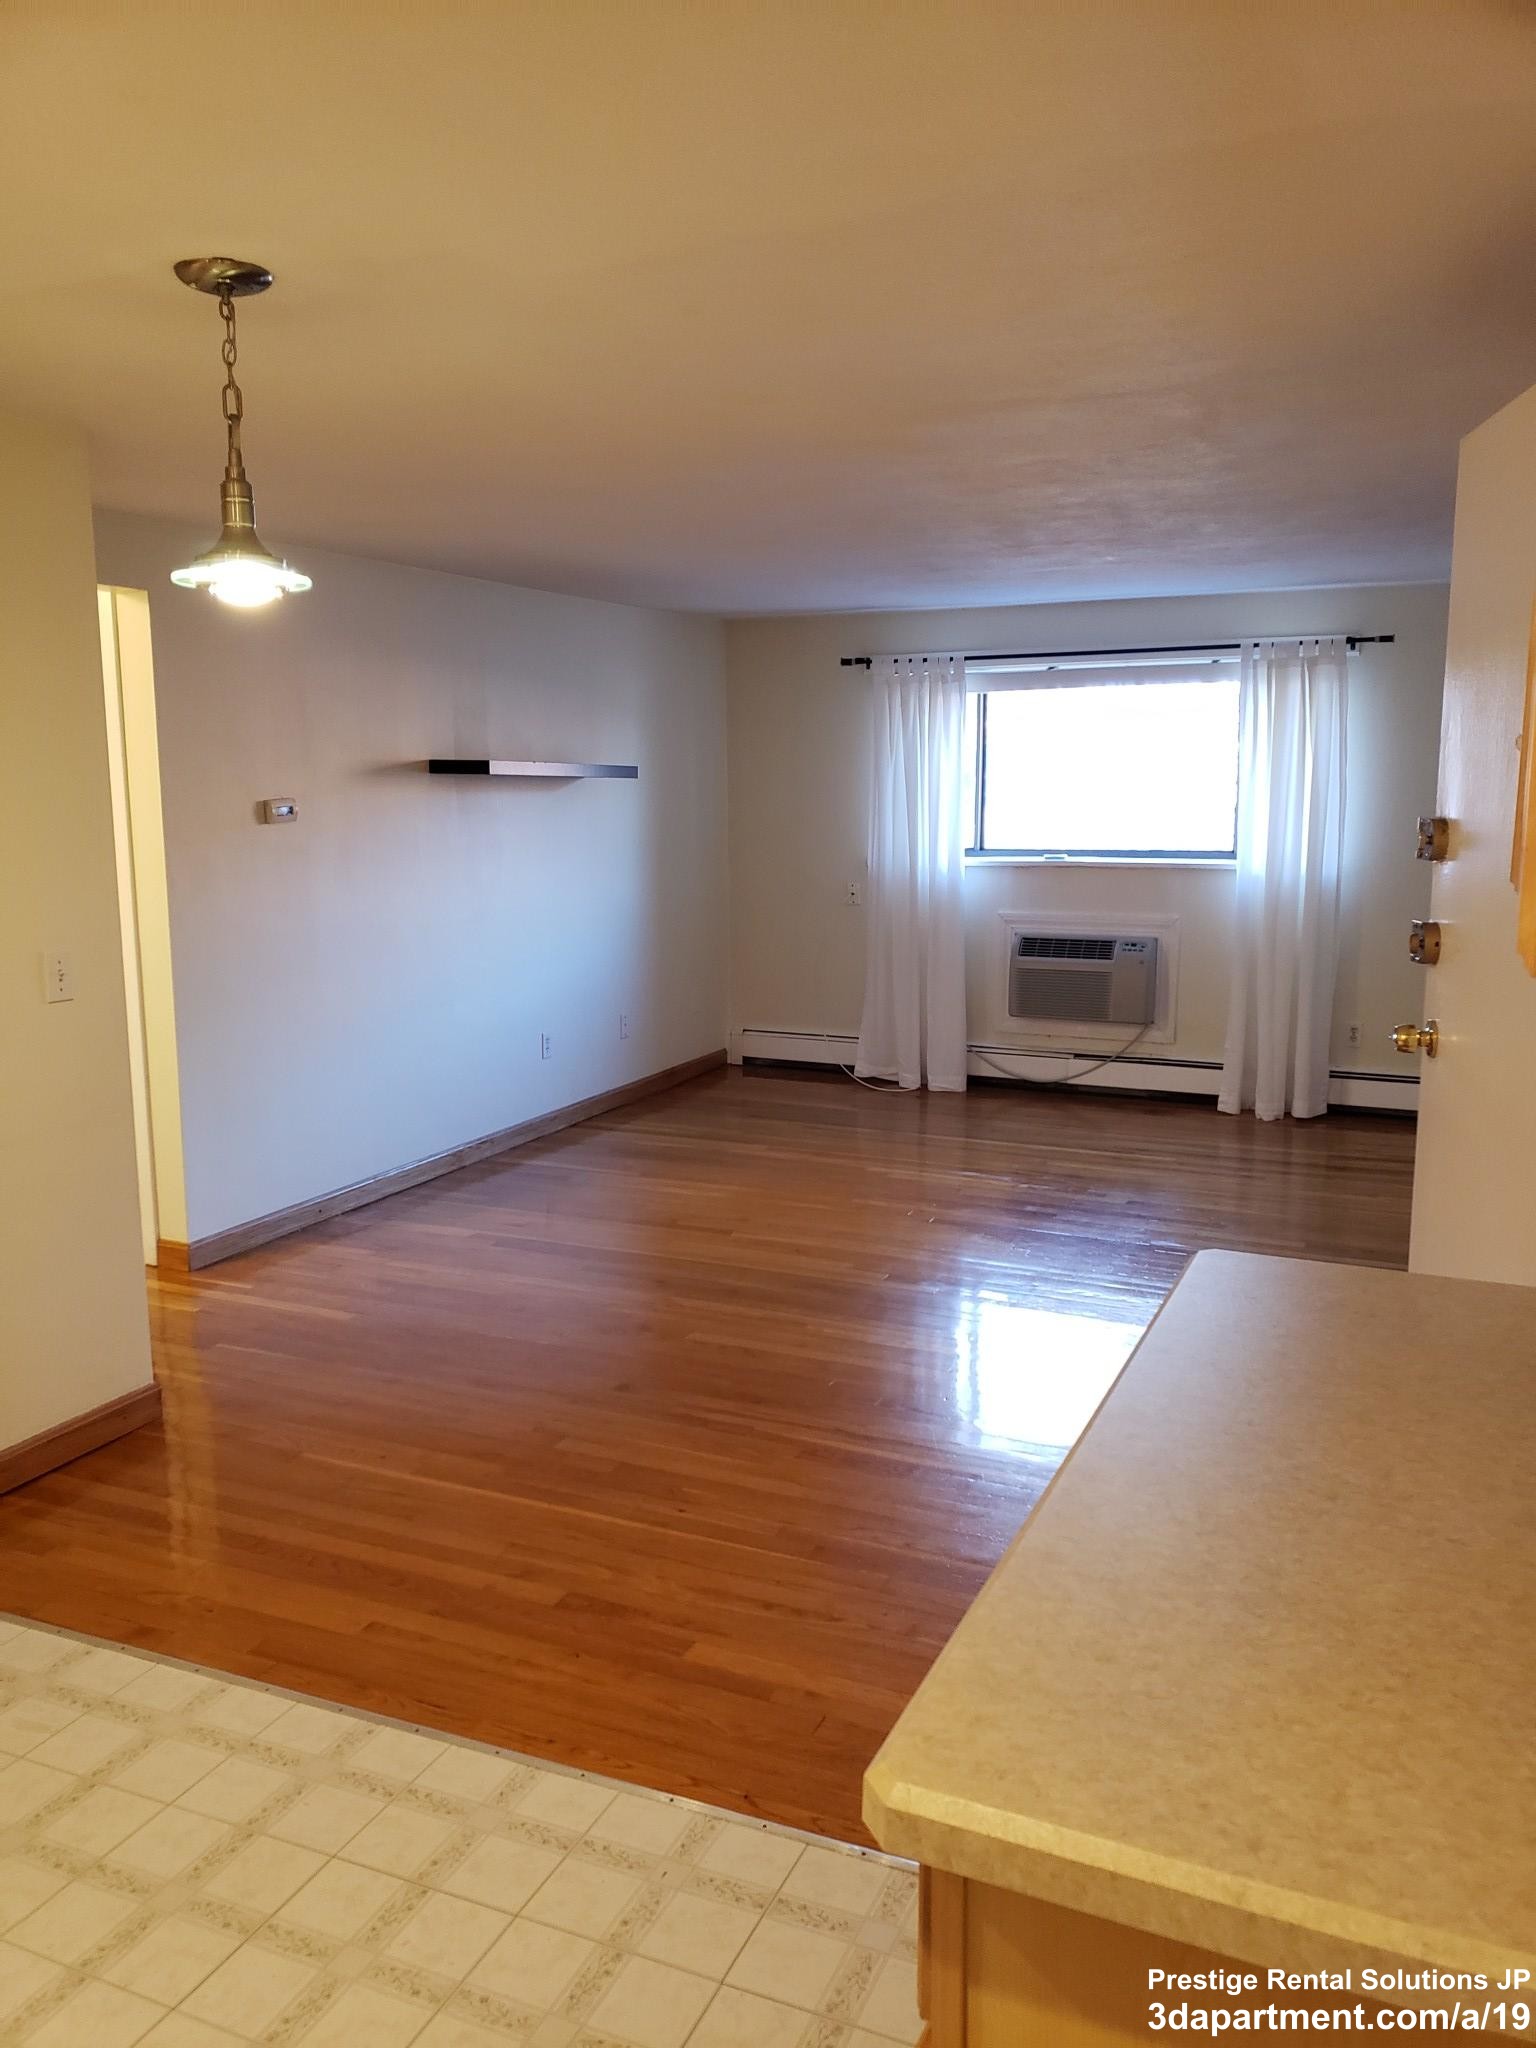 Photos of apartment on riverside St.,Watertown MA 02472